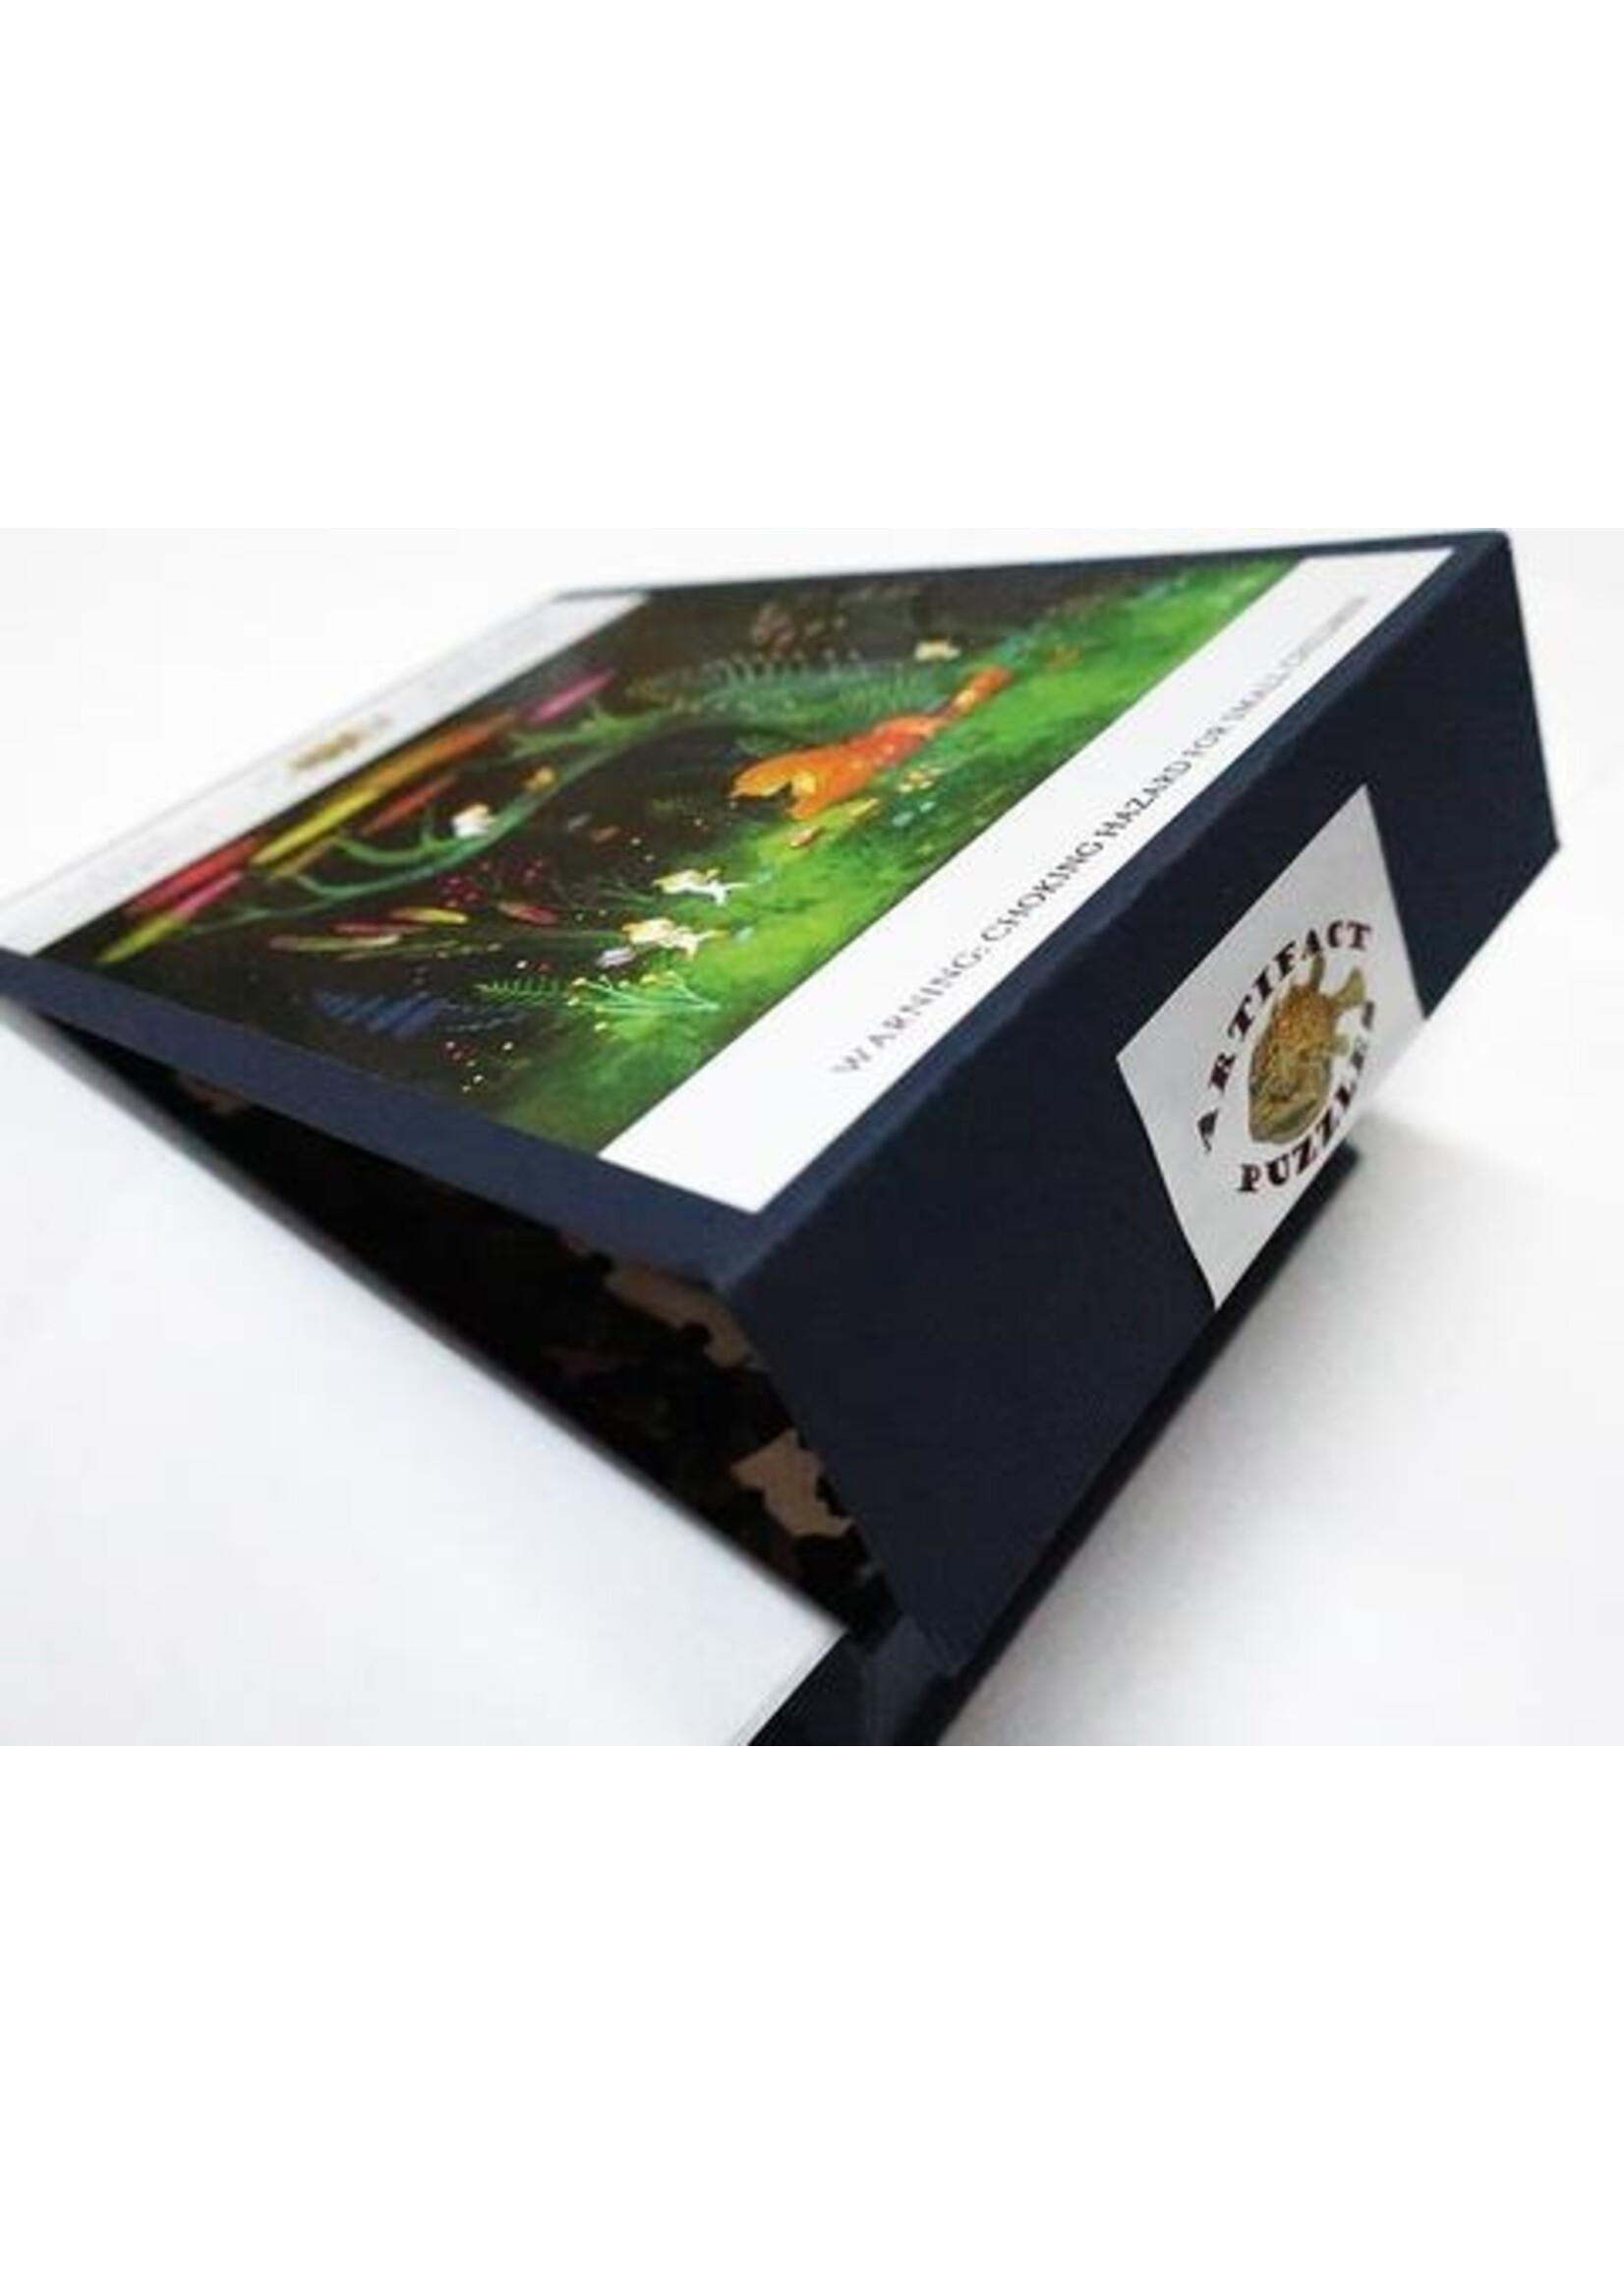 Artifact Puzzles "Fruit of Dreams" Artifact Wooden Jigsaw Puzzle